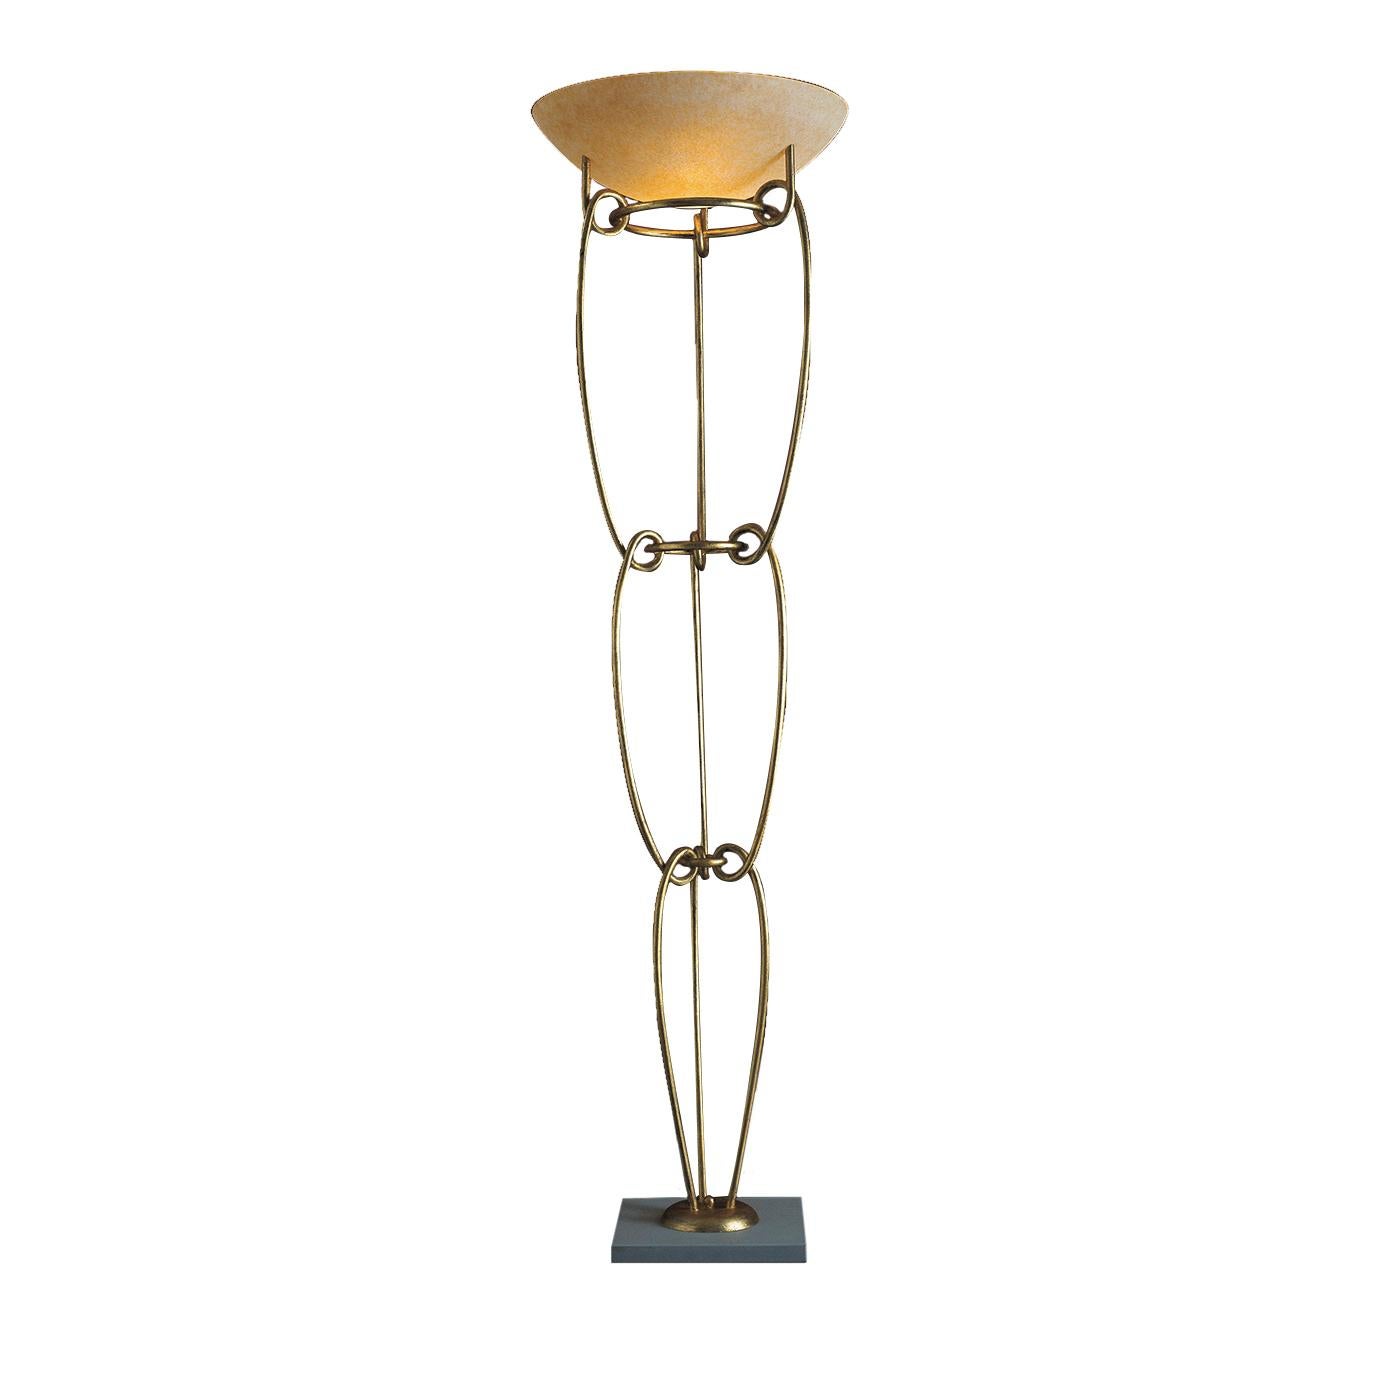 Entirely handcrafted of forged iron, this exquisite floor lamp features a timeless, three-tiered, sinuous design that makes it ideal for any decor. The combination of the modernity of the iron with the magnificent half-sphere lampshade made of